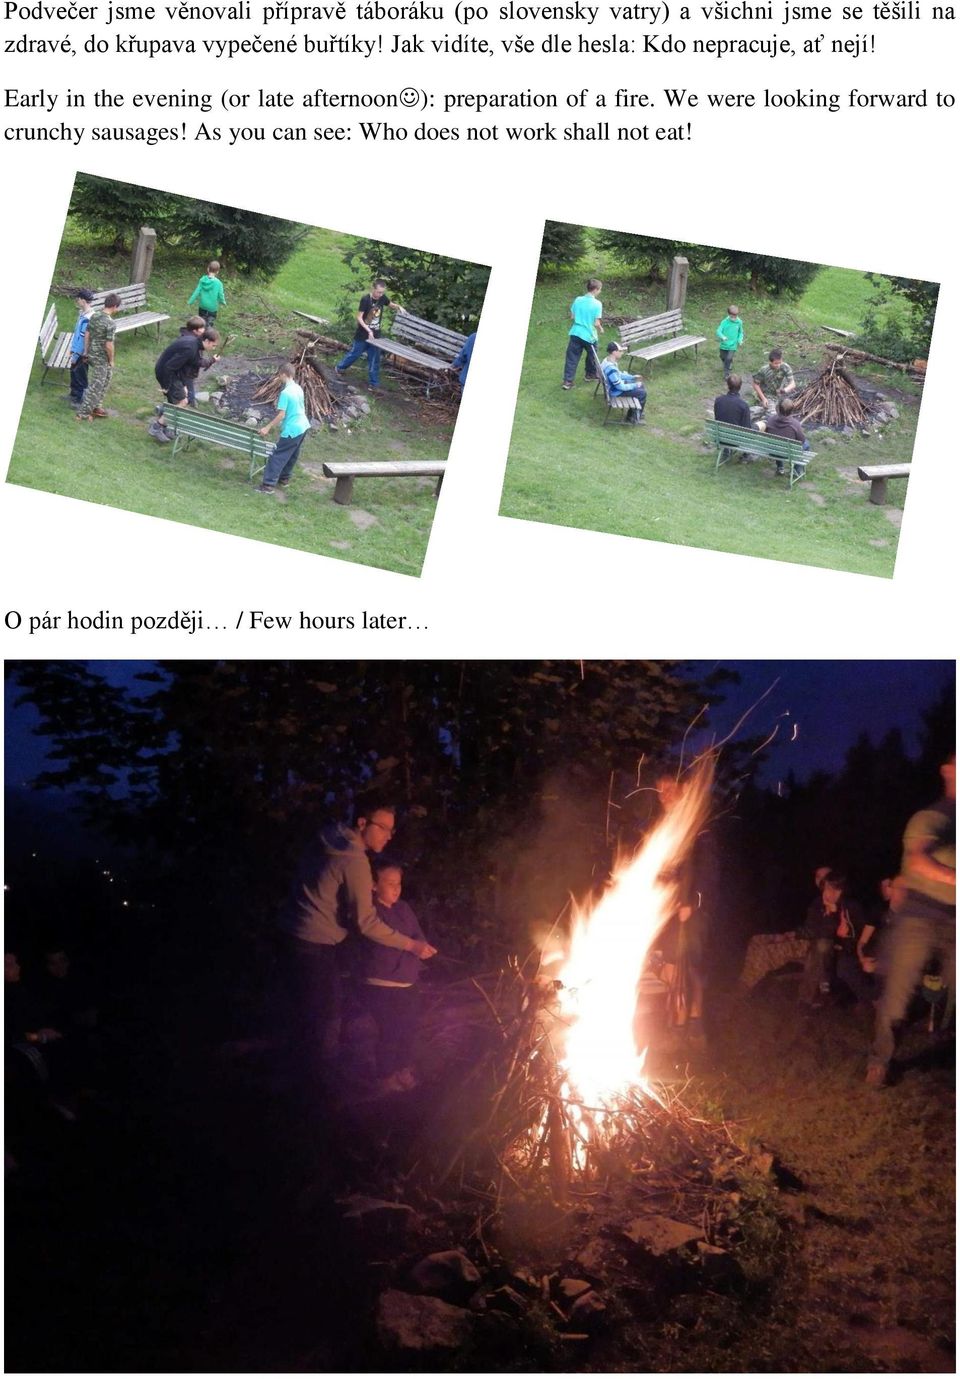 Early in the evening (or late afternoon ): preparation of a fire.